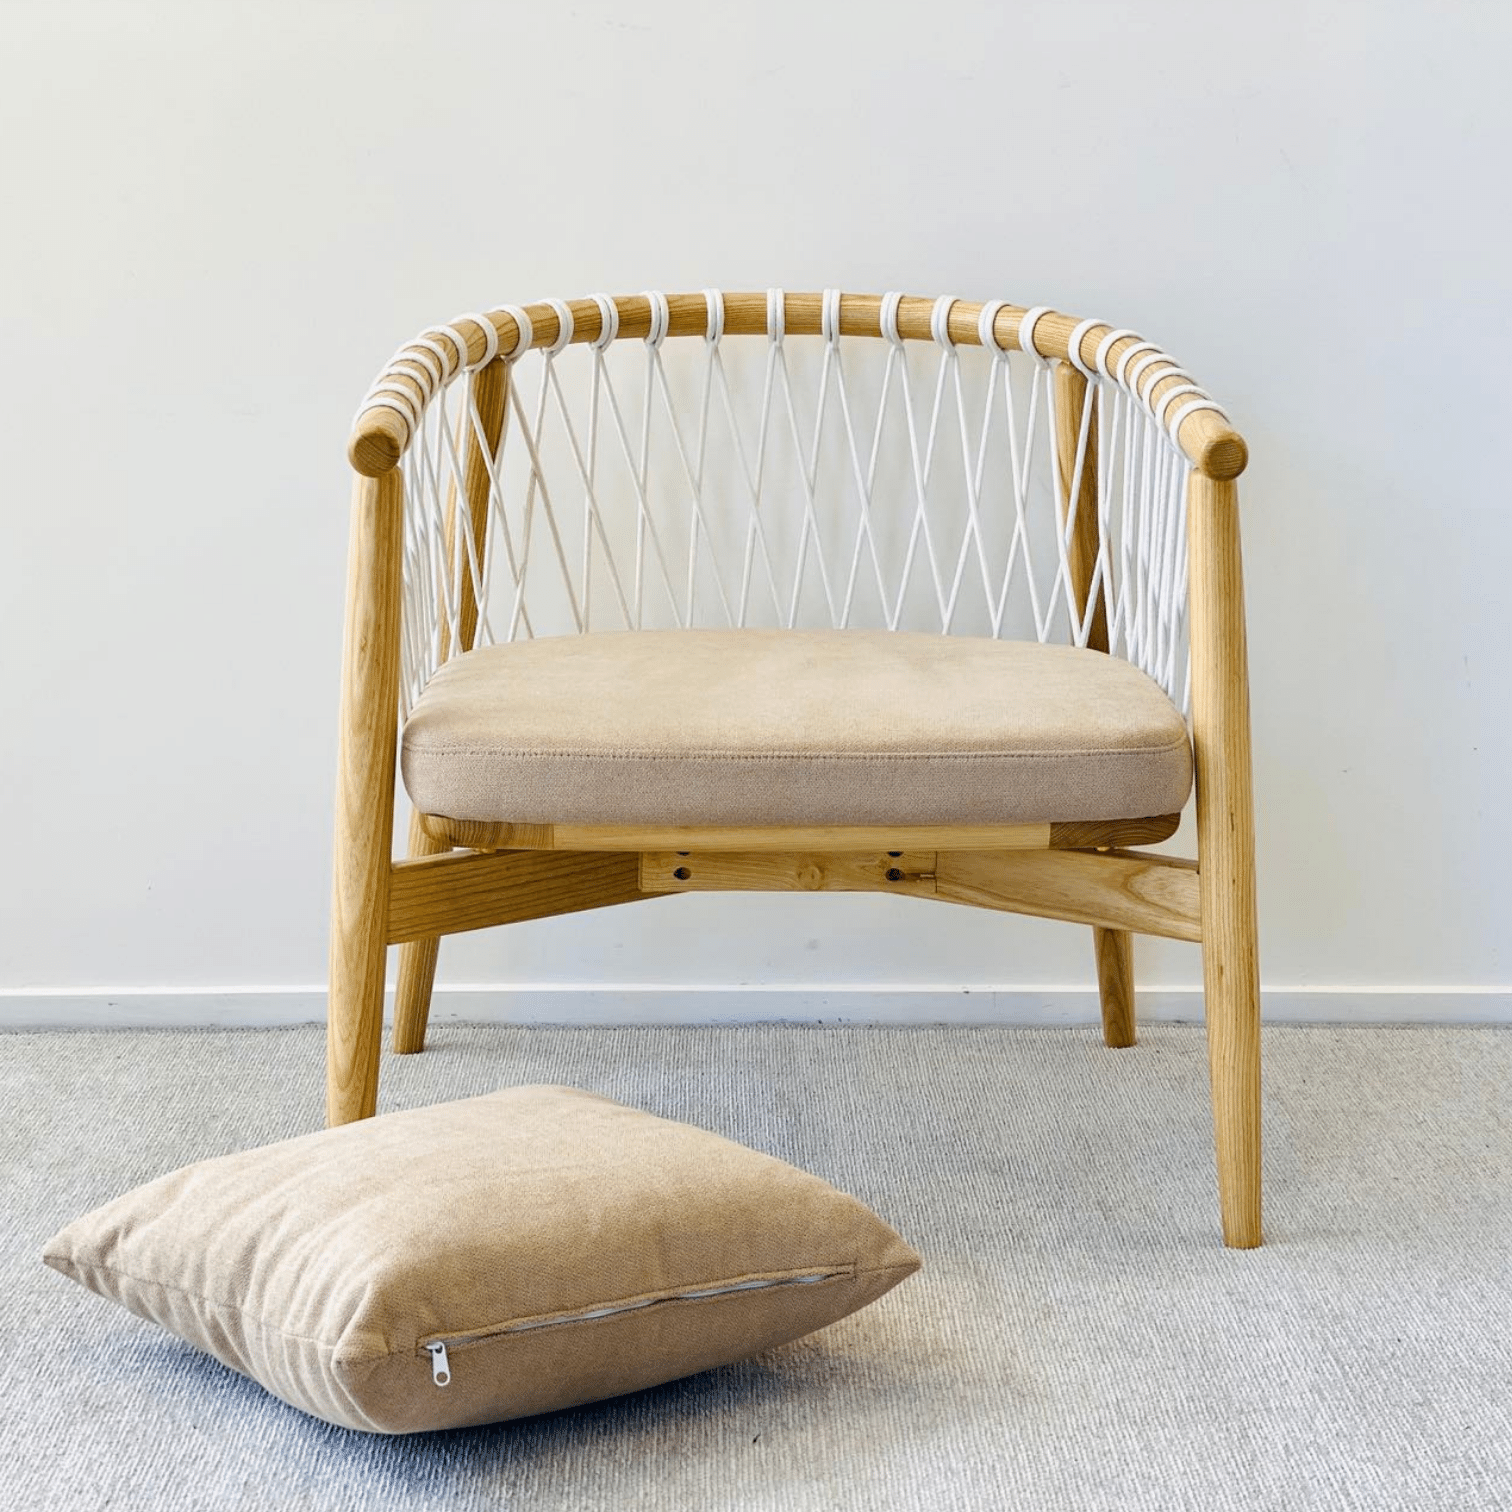 ironvanliving-Product-Leisure-armchair-Nest-natural-ash-white-cod-cushion-aside